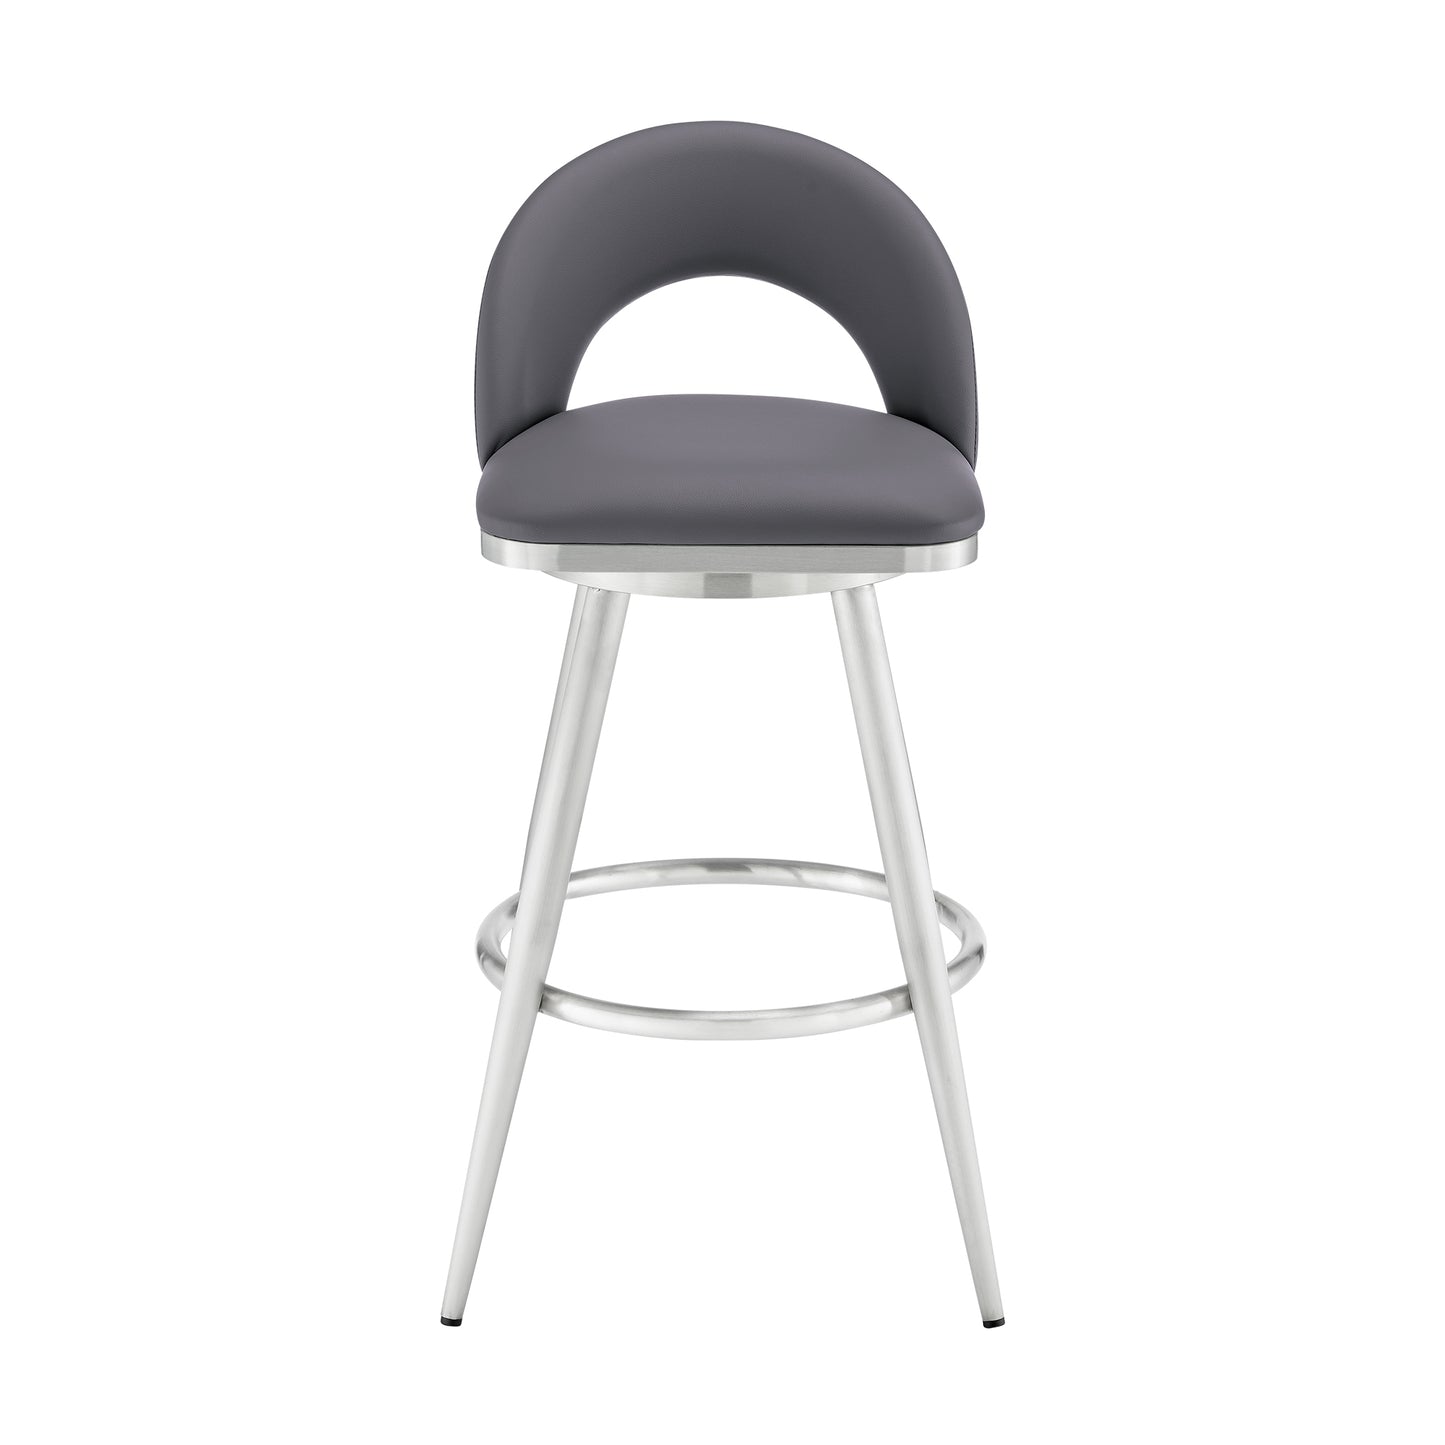 Charlotte 30" Swivel Bar Stool in Brushed Stainless Steel with Gray Faux Leather